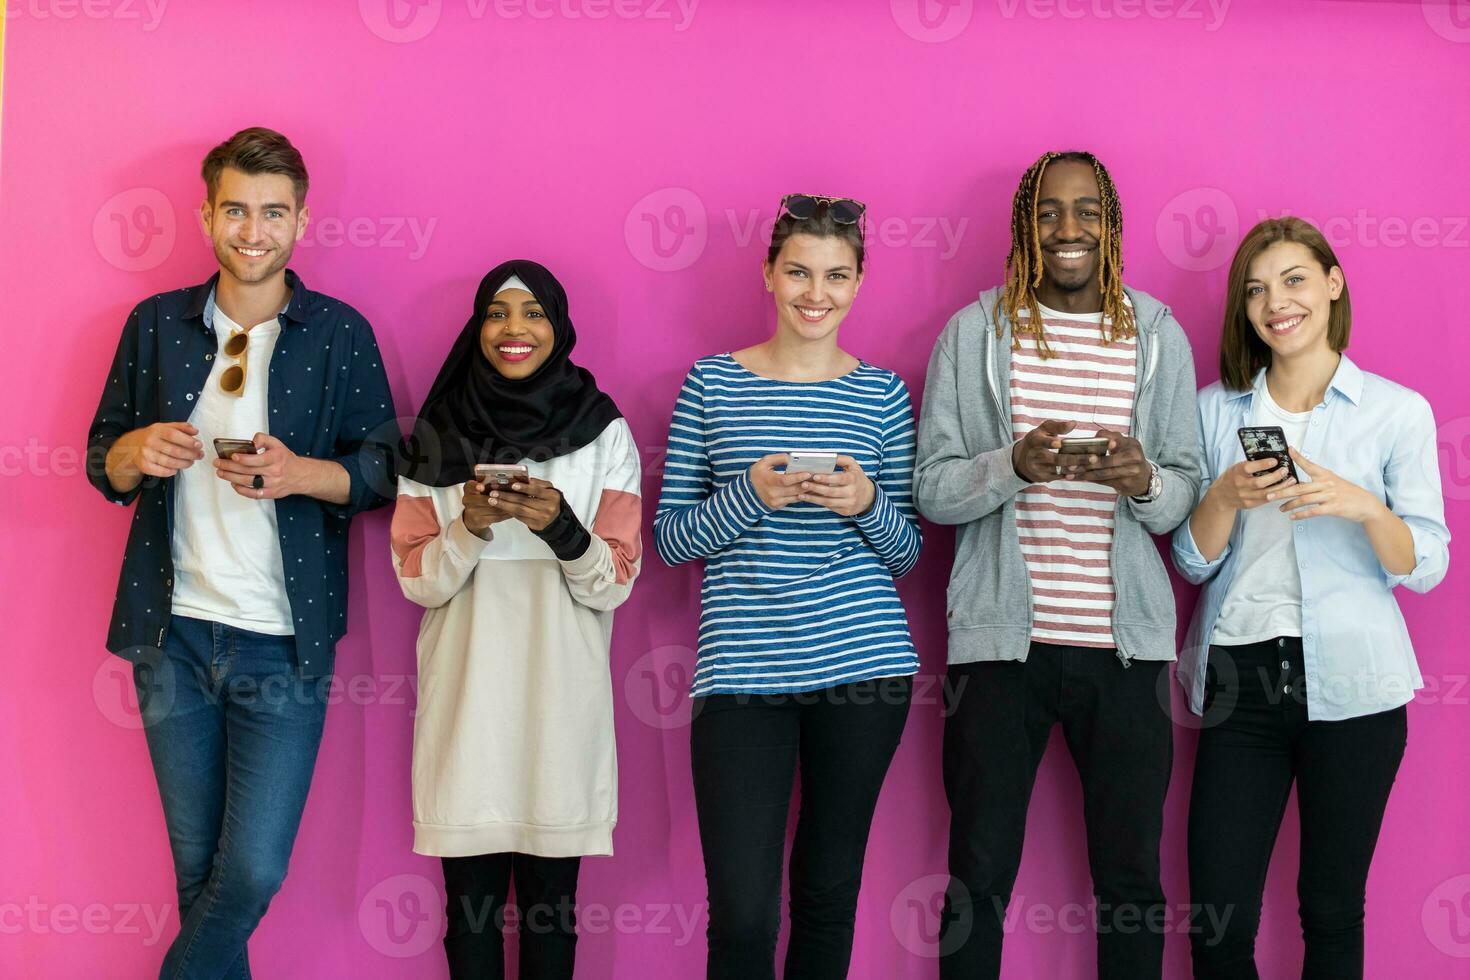 Diverse teenagers using mobile devices while posing for a studio photo in front of a colorful background